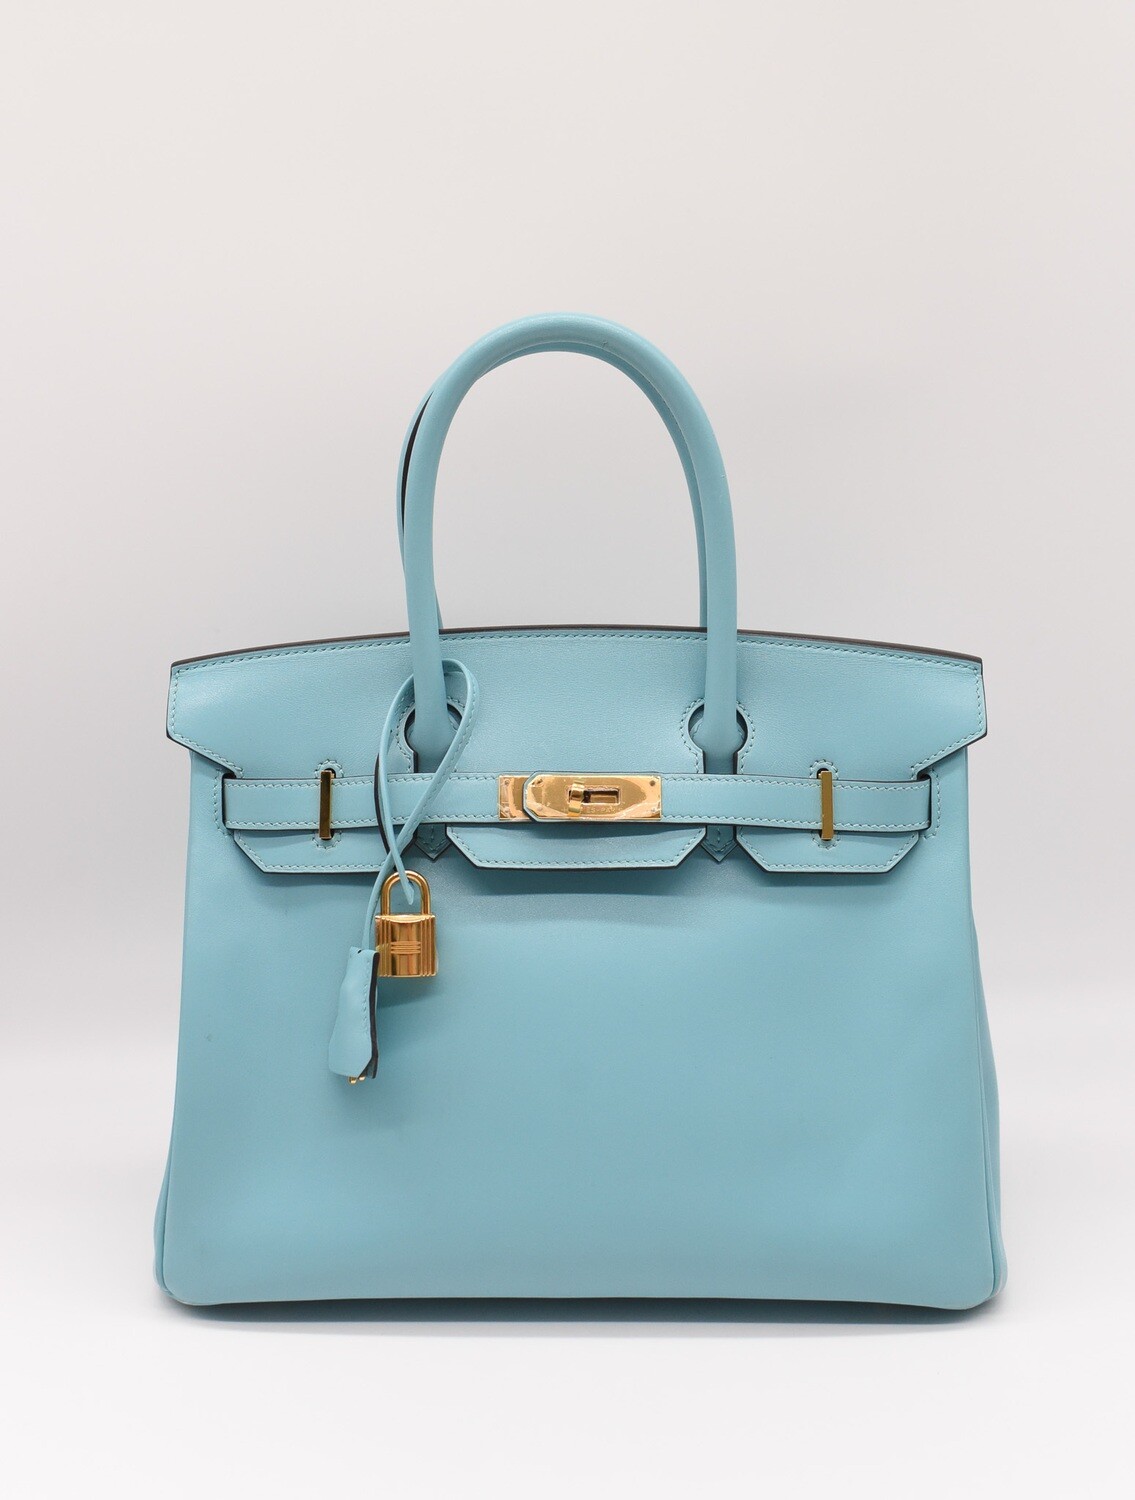 Hermes Birkin 30, Light Blue Swift Leather with Gold Hardware, 2017 A  Stamp, Preowned with Box WA001 - Julia Rose Boston